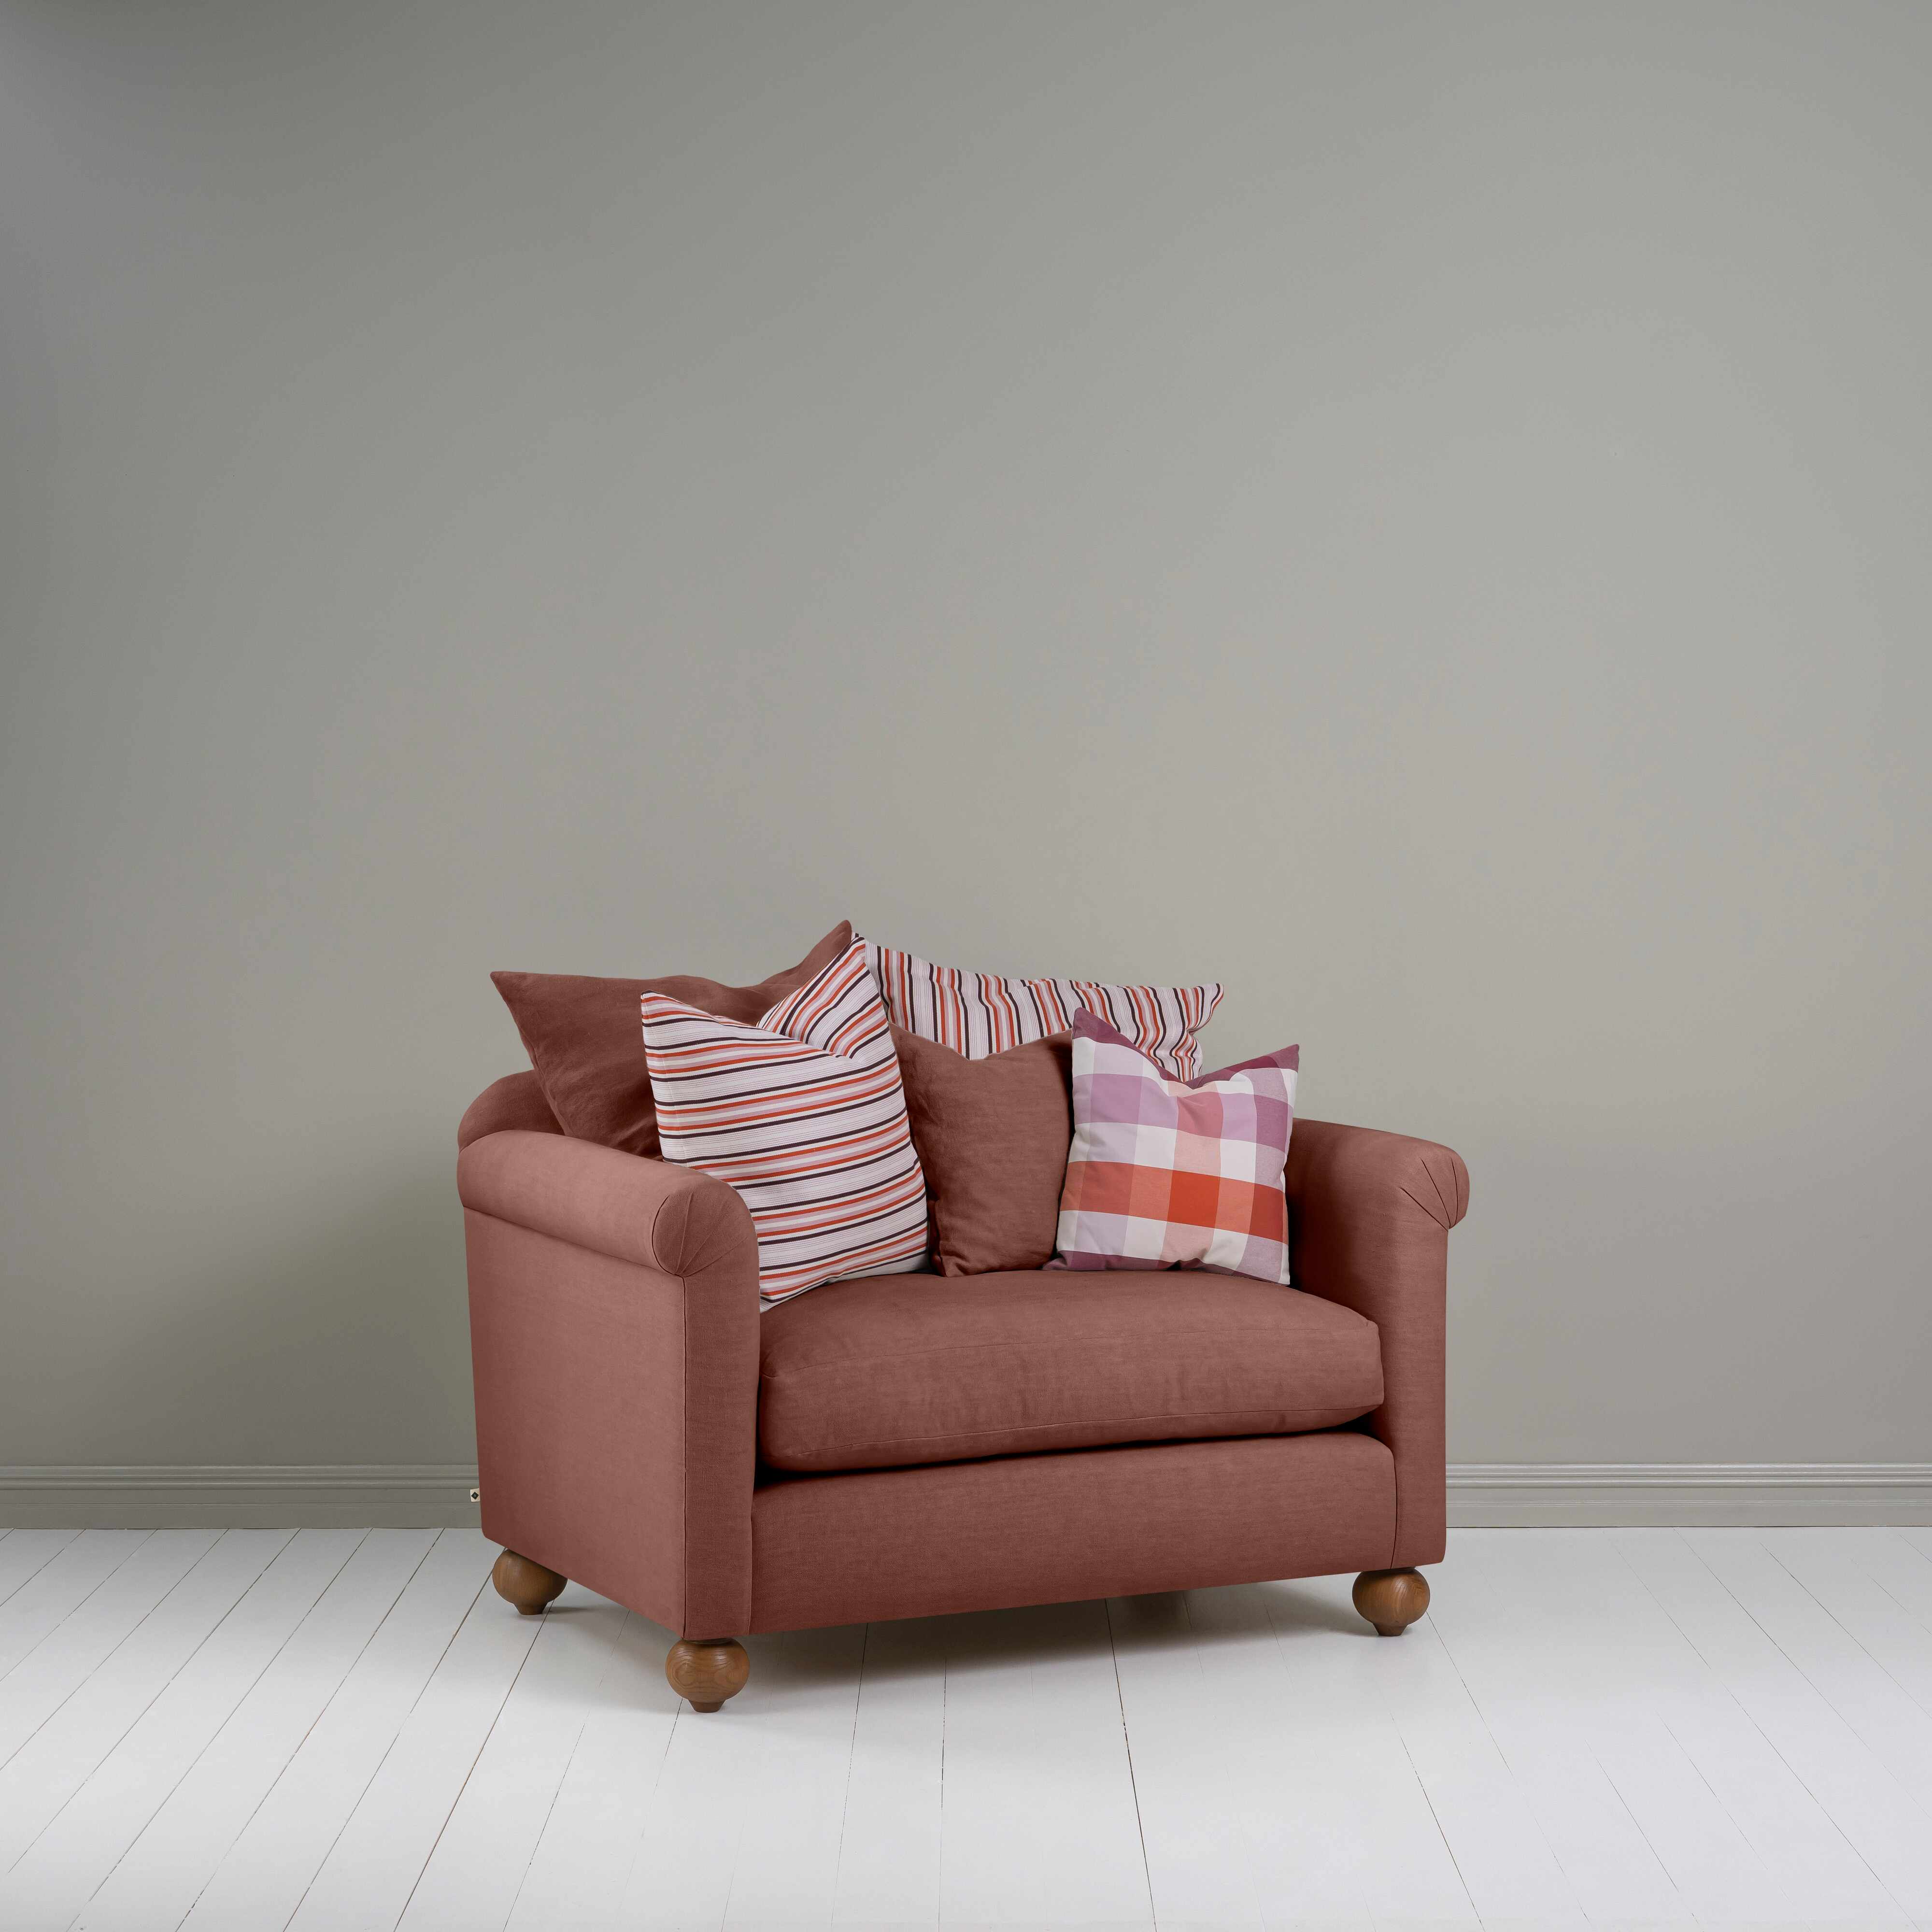  Dolittle Love Seat in Laidback Linen Sweet Briar 